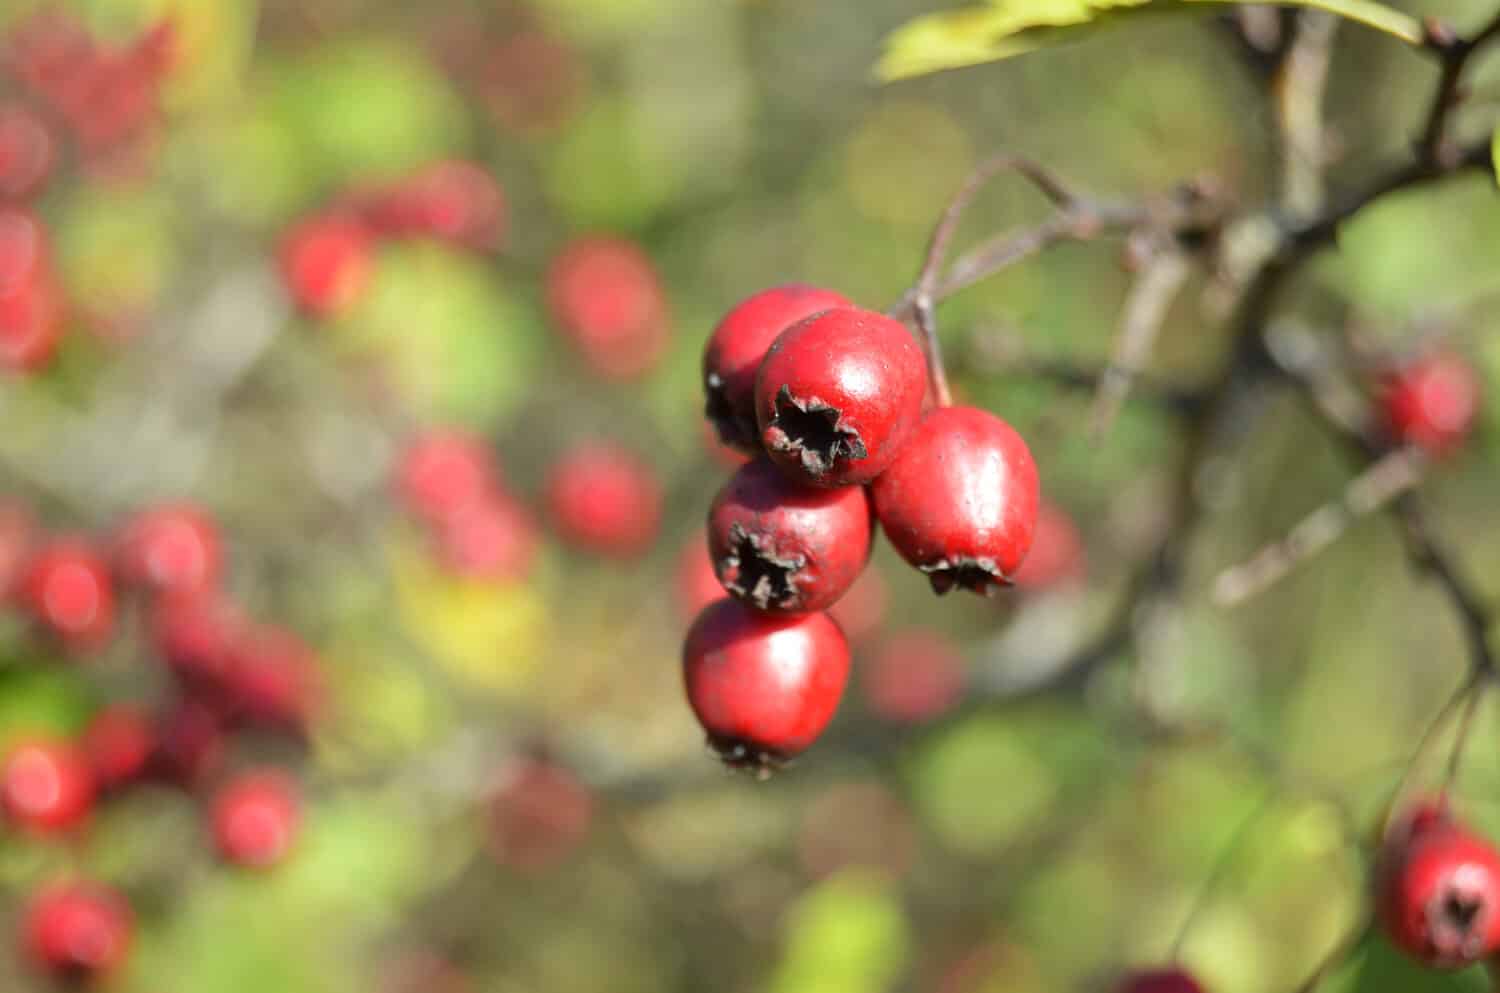 Hawthorn (Crataegus) shrub with it's red ripe hawberries fruits on a sunny autumn day